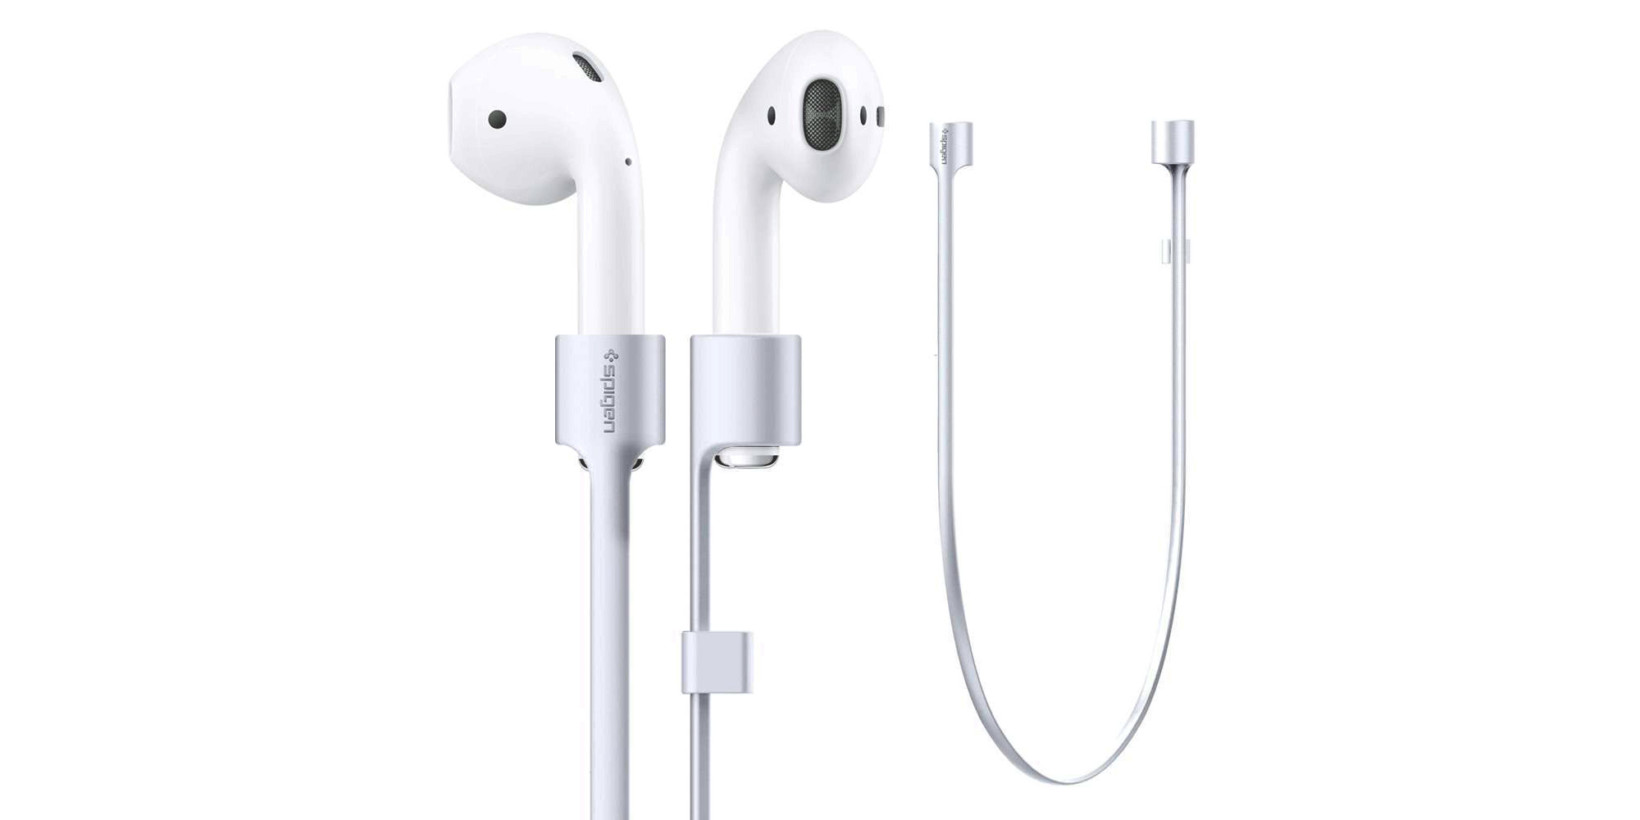 You can now buy a strap for Apple's wireless AirPods